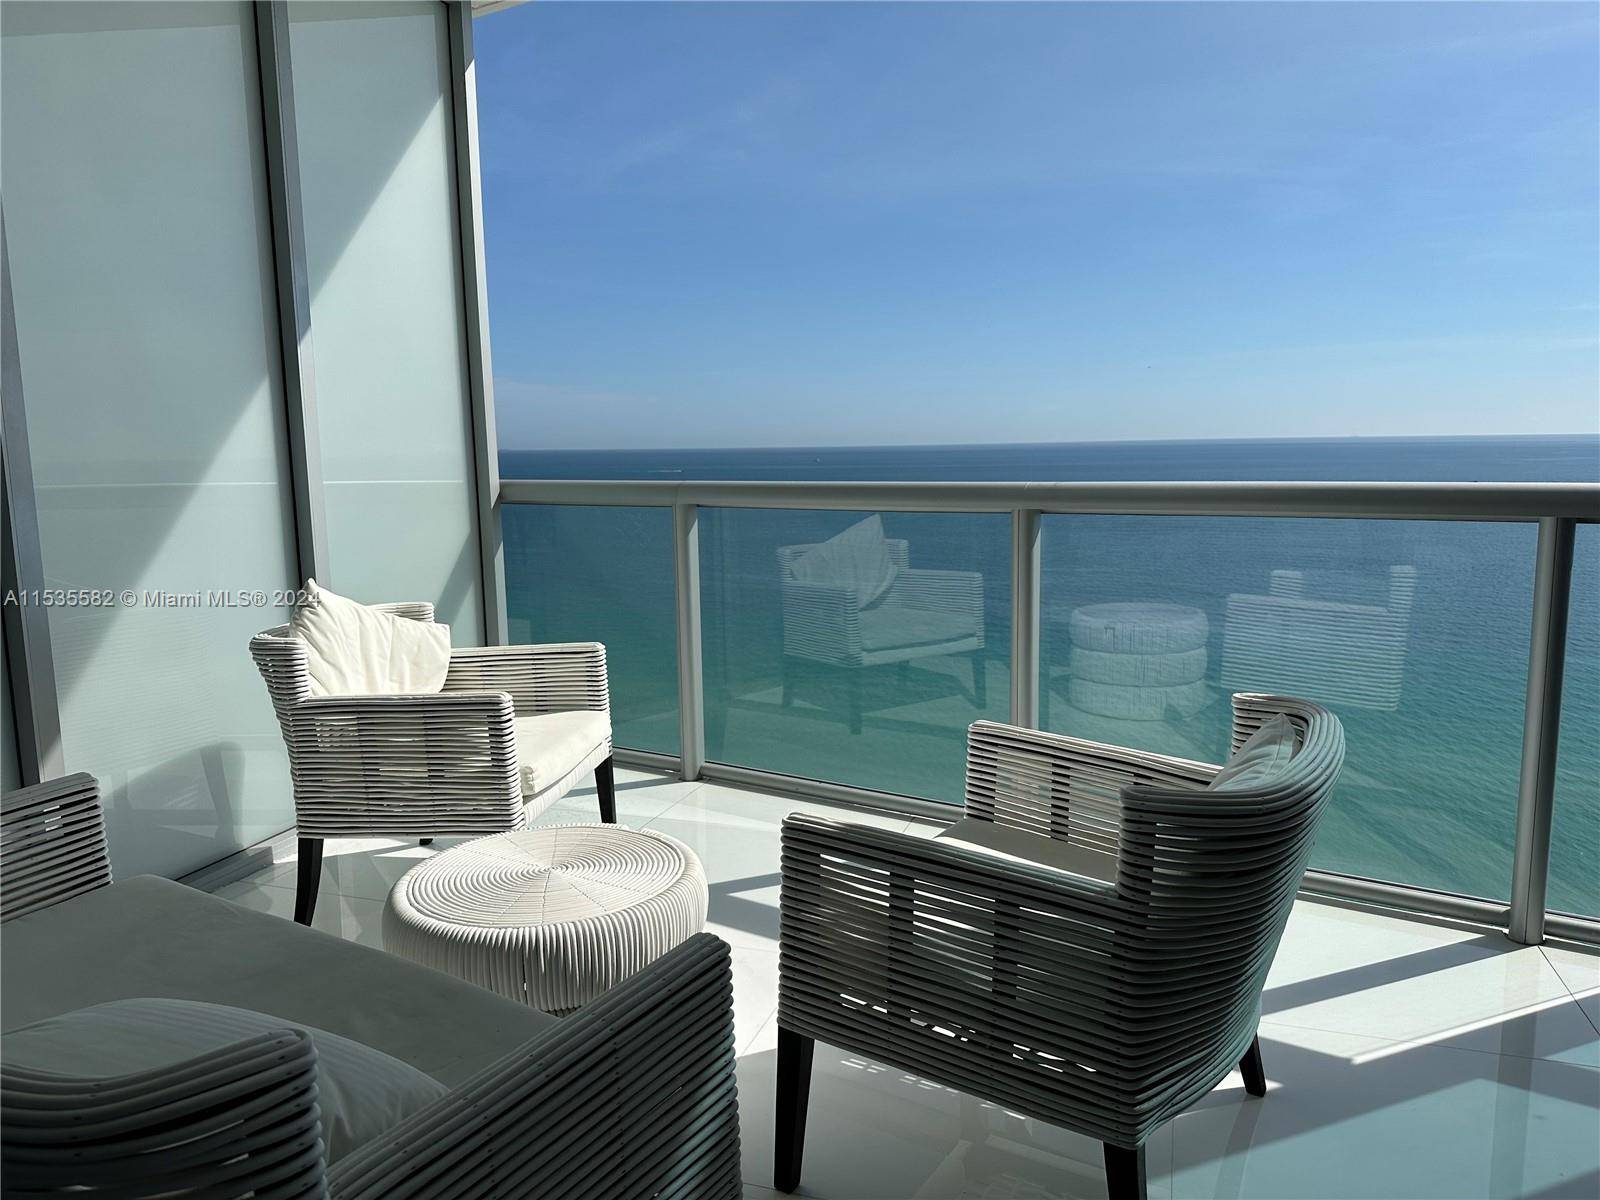 OMG what a view ! You found a perfect ocean front apartment !